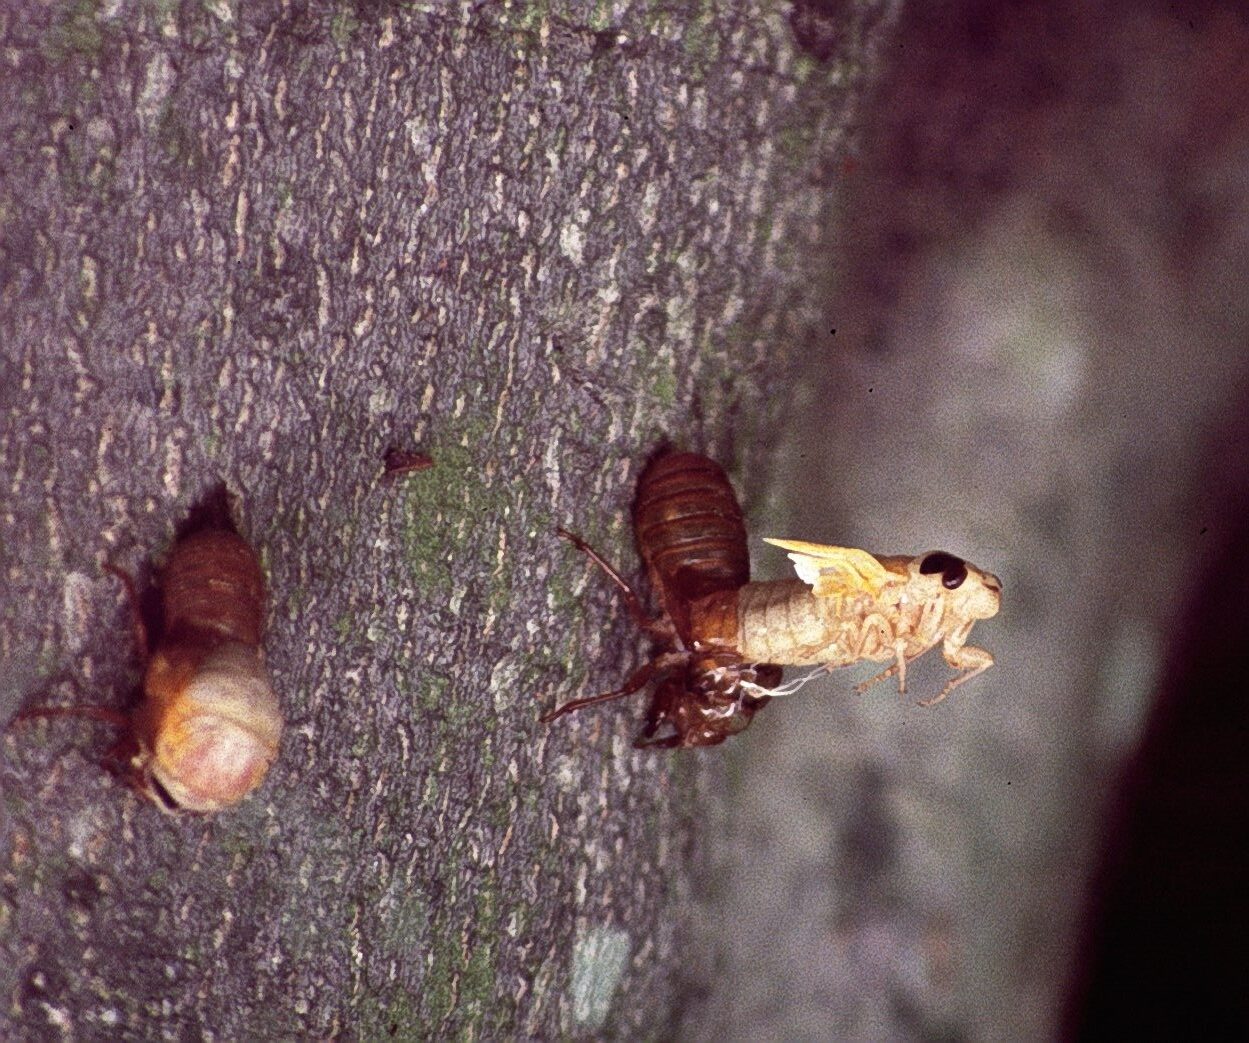 adult cicada emerges from the skin of the nymph